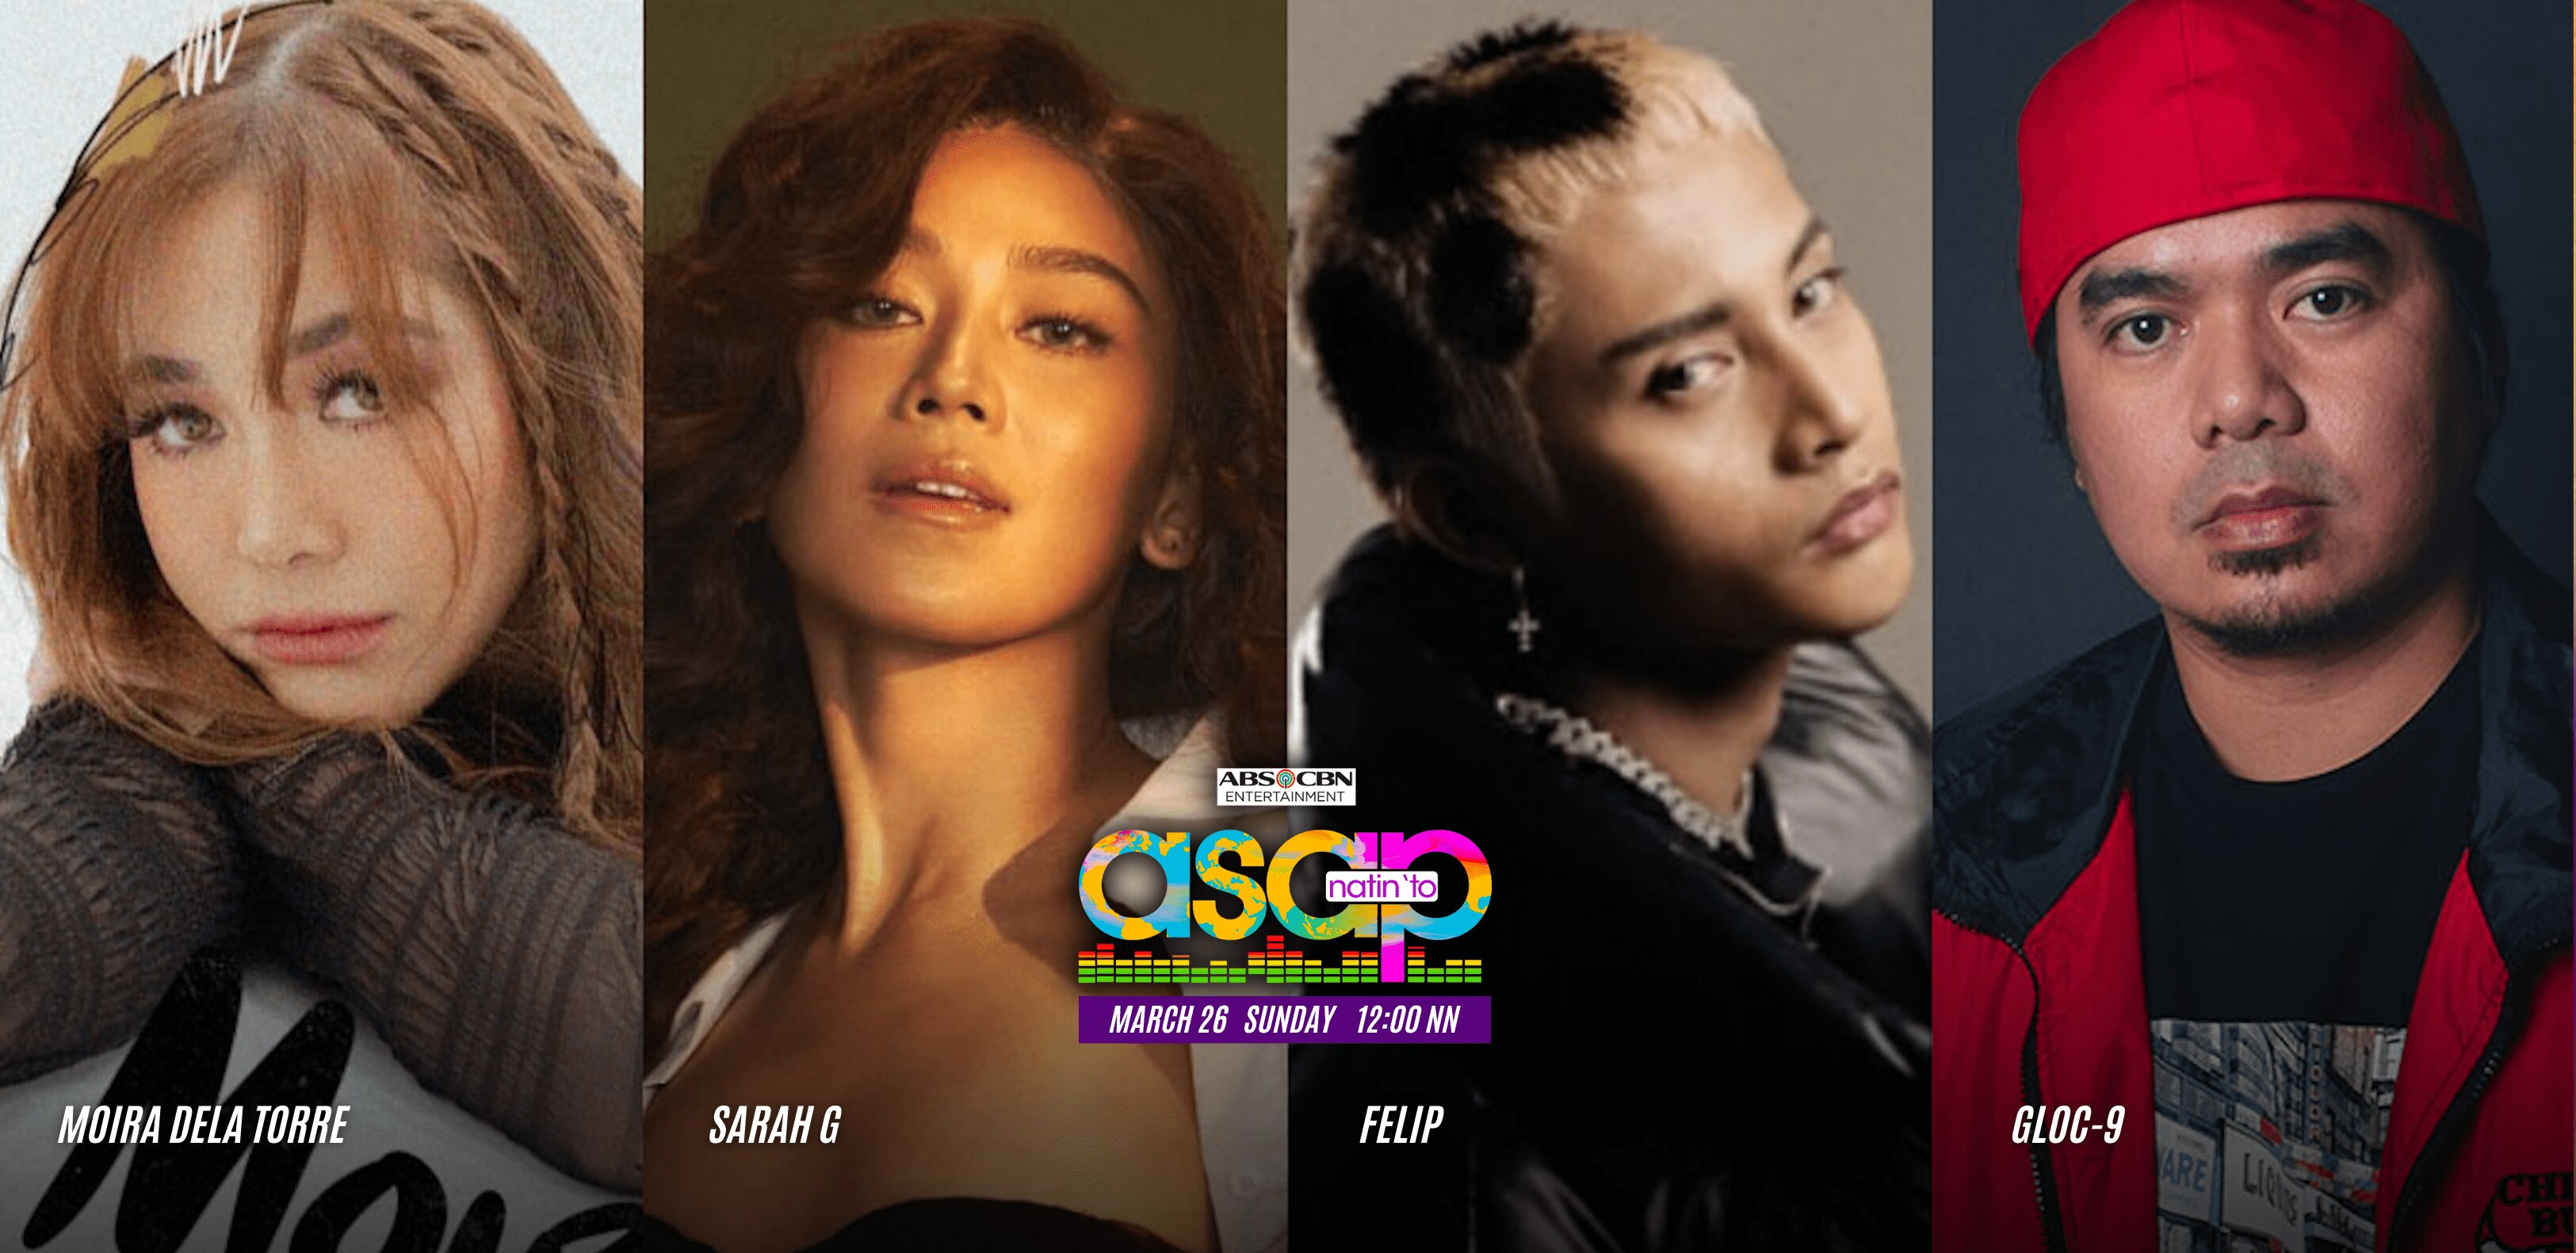 'ASAP Natin 'To' brings its hot pick acts from Sarah G, Moira, Felip, and Gloc9 this Sunday